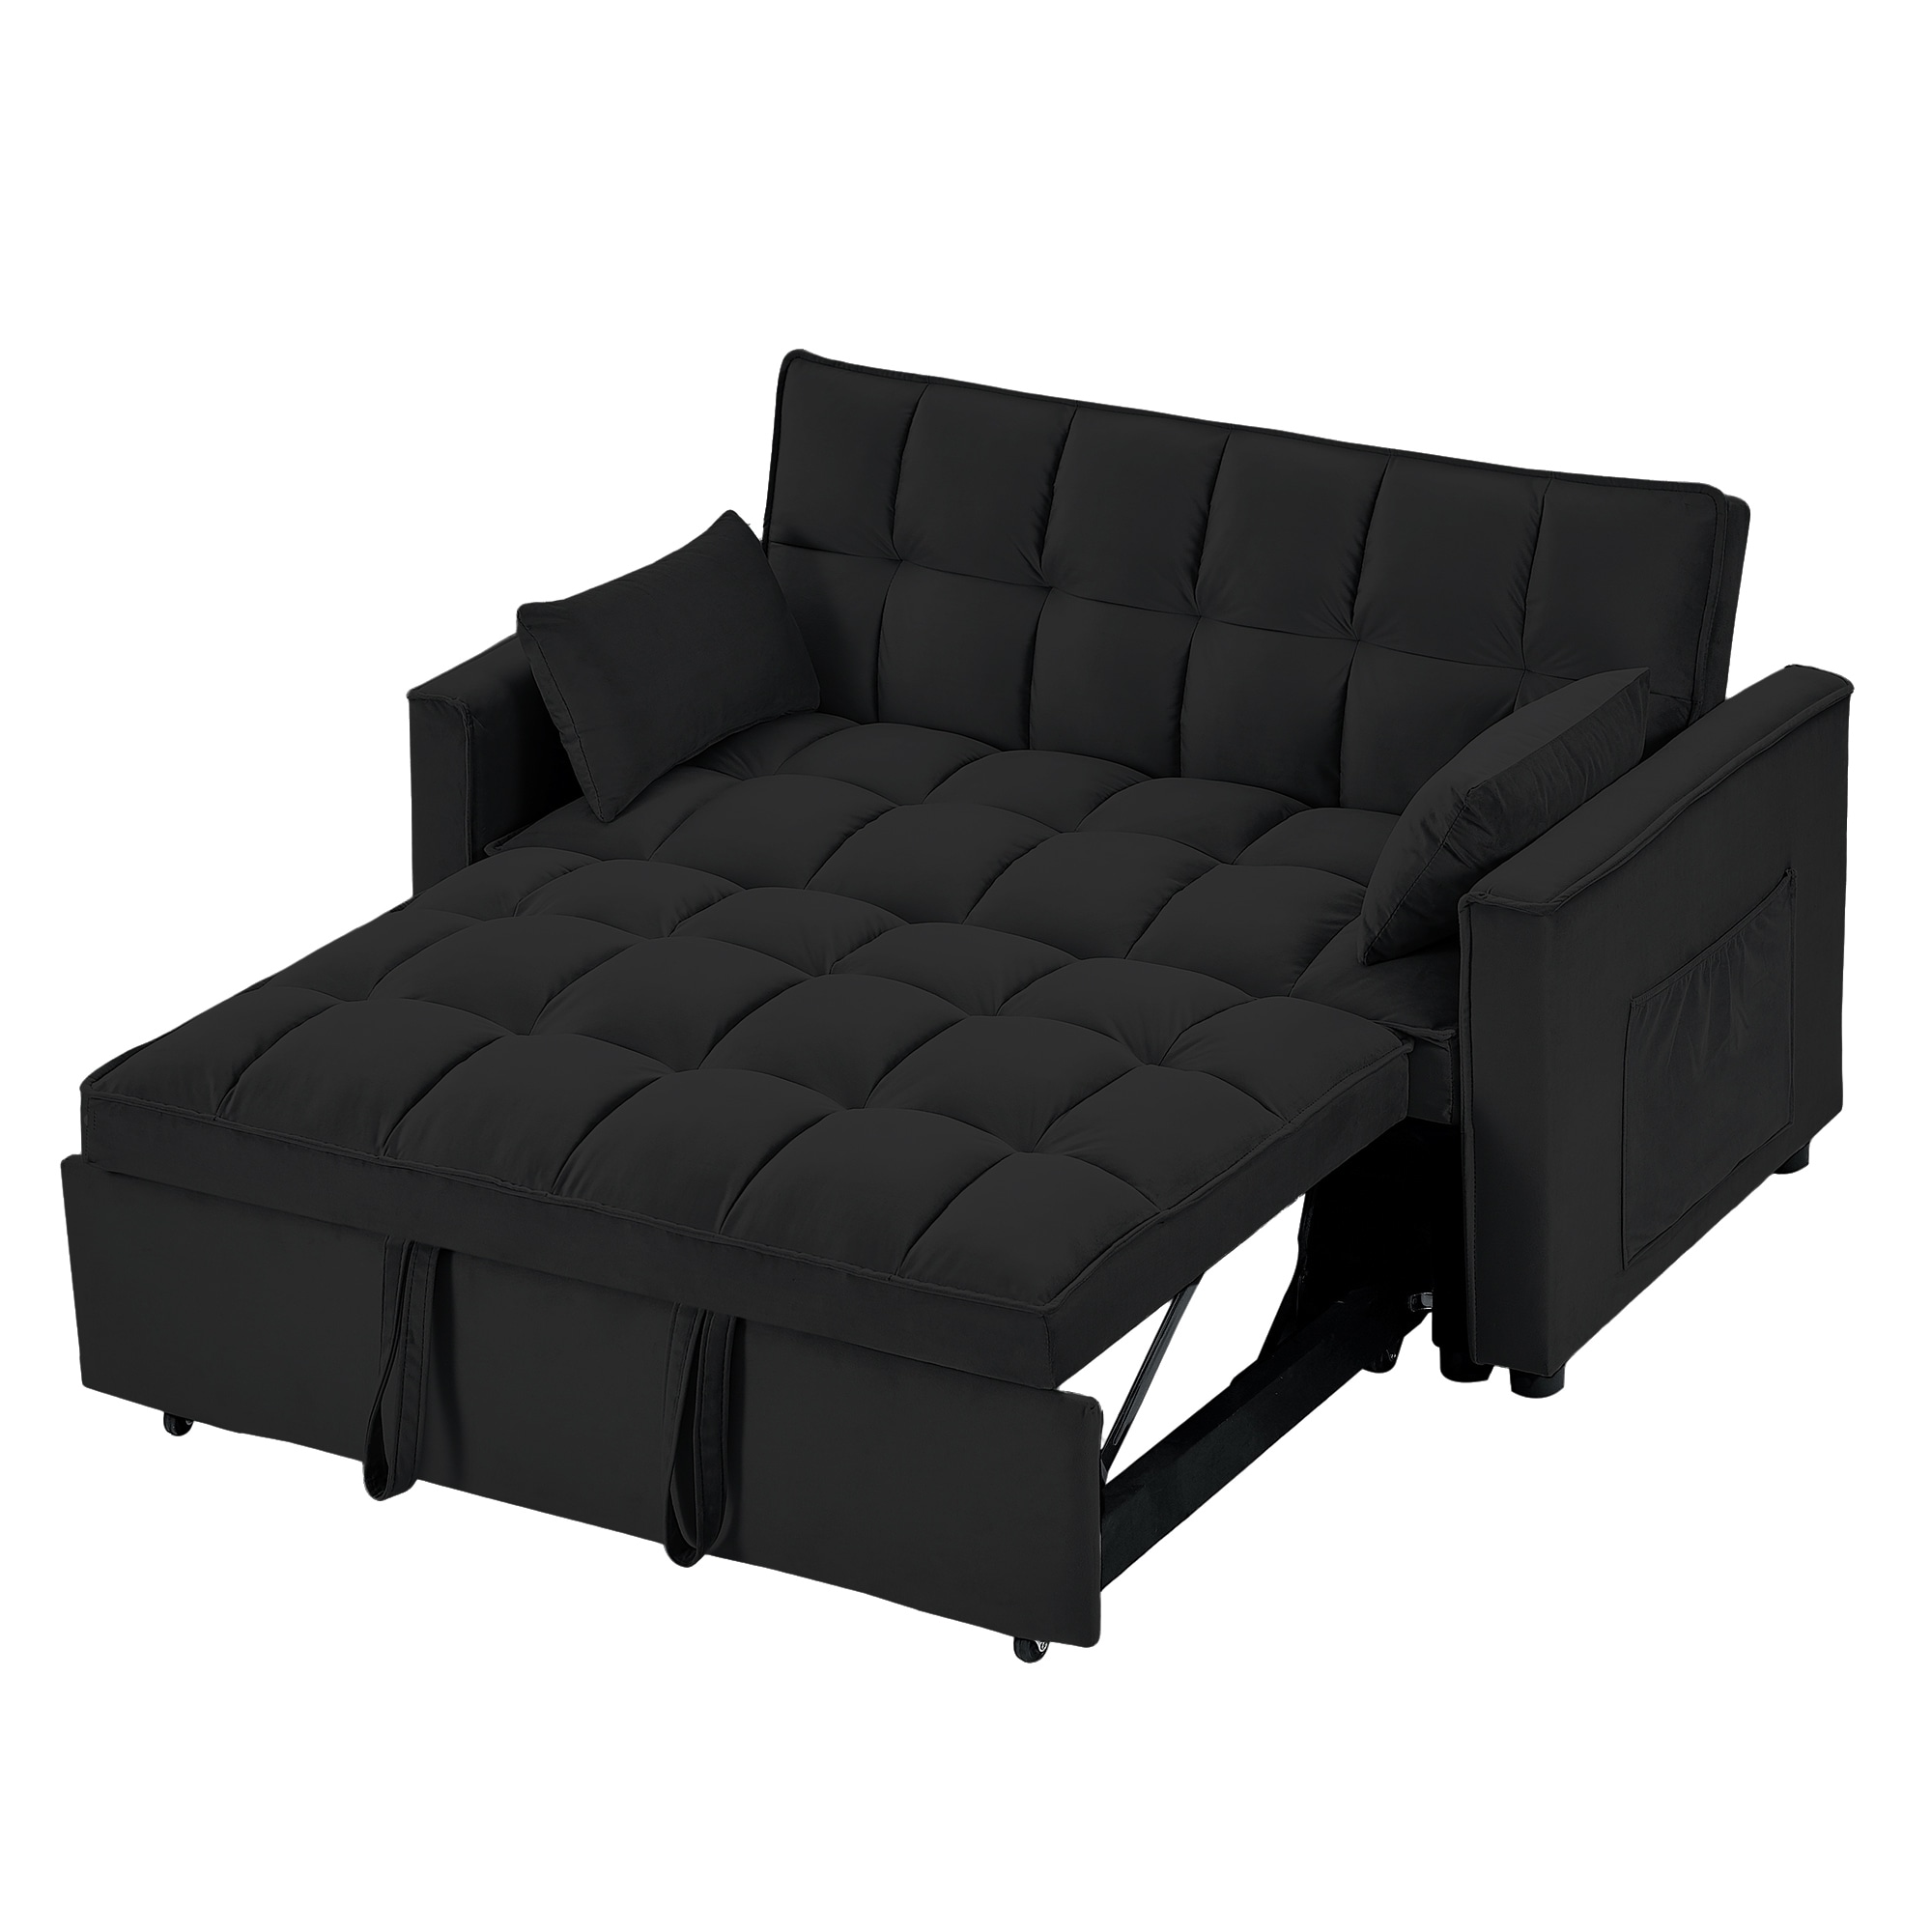 Sleeper Sofa Couch with Pull Out Bed and Side Pockets, Modern Velvet Convertible Sleeper Daybed for Small Space